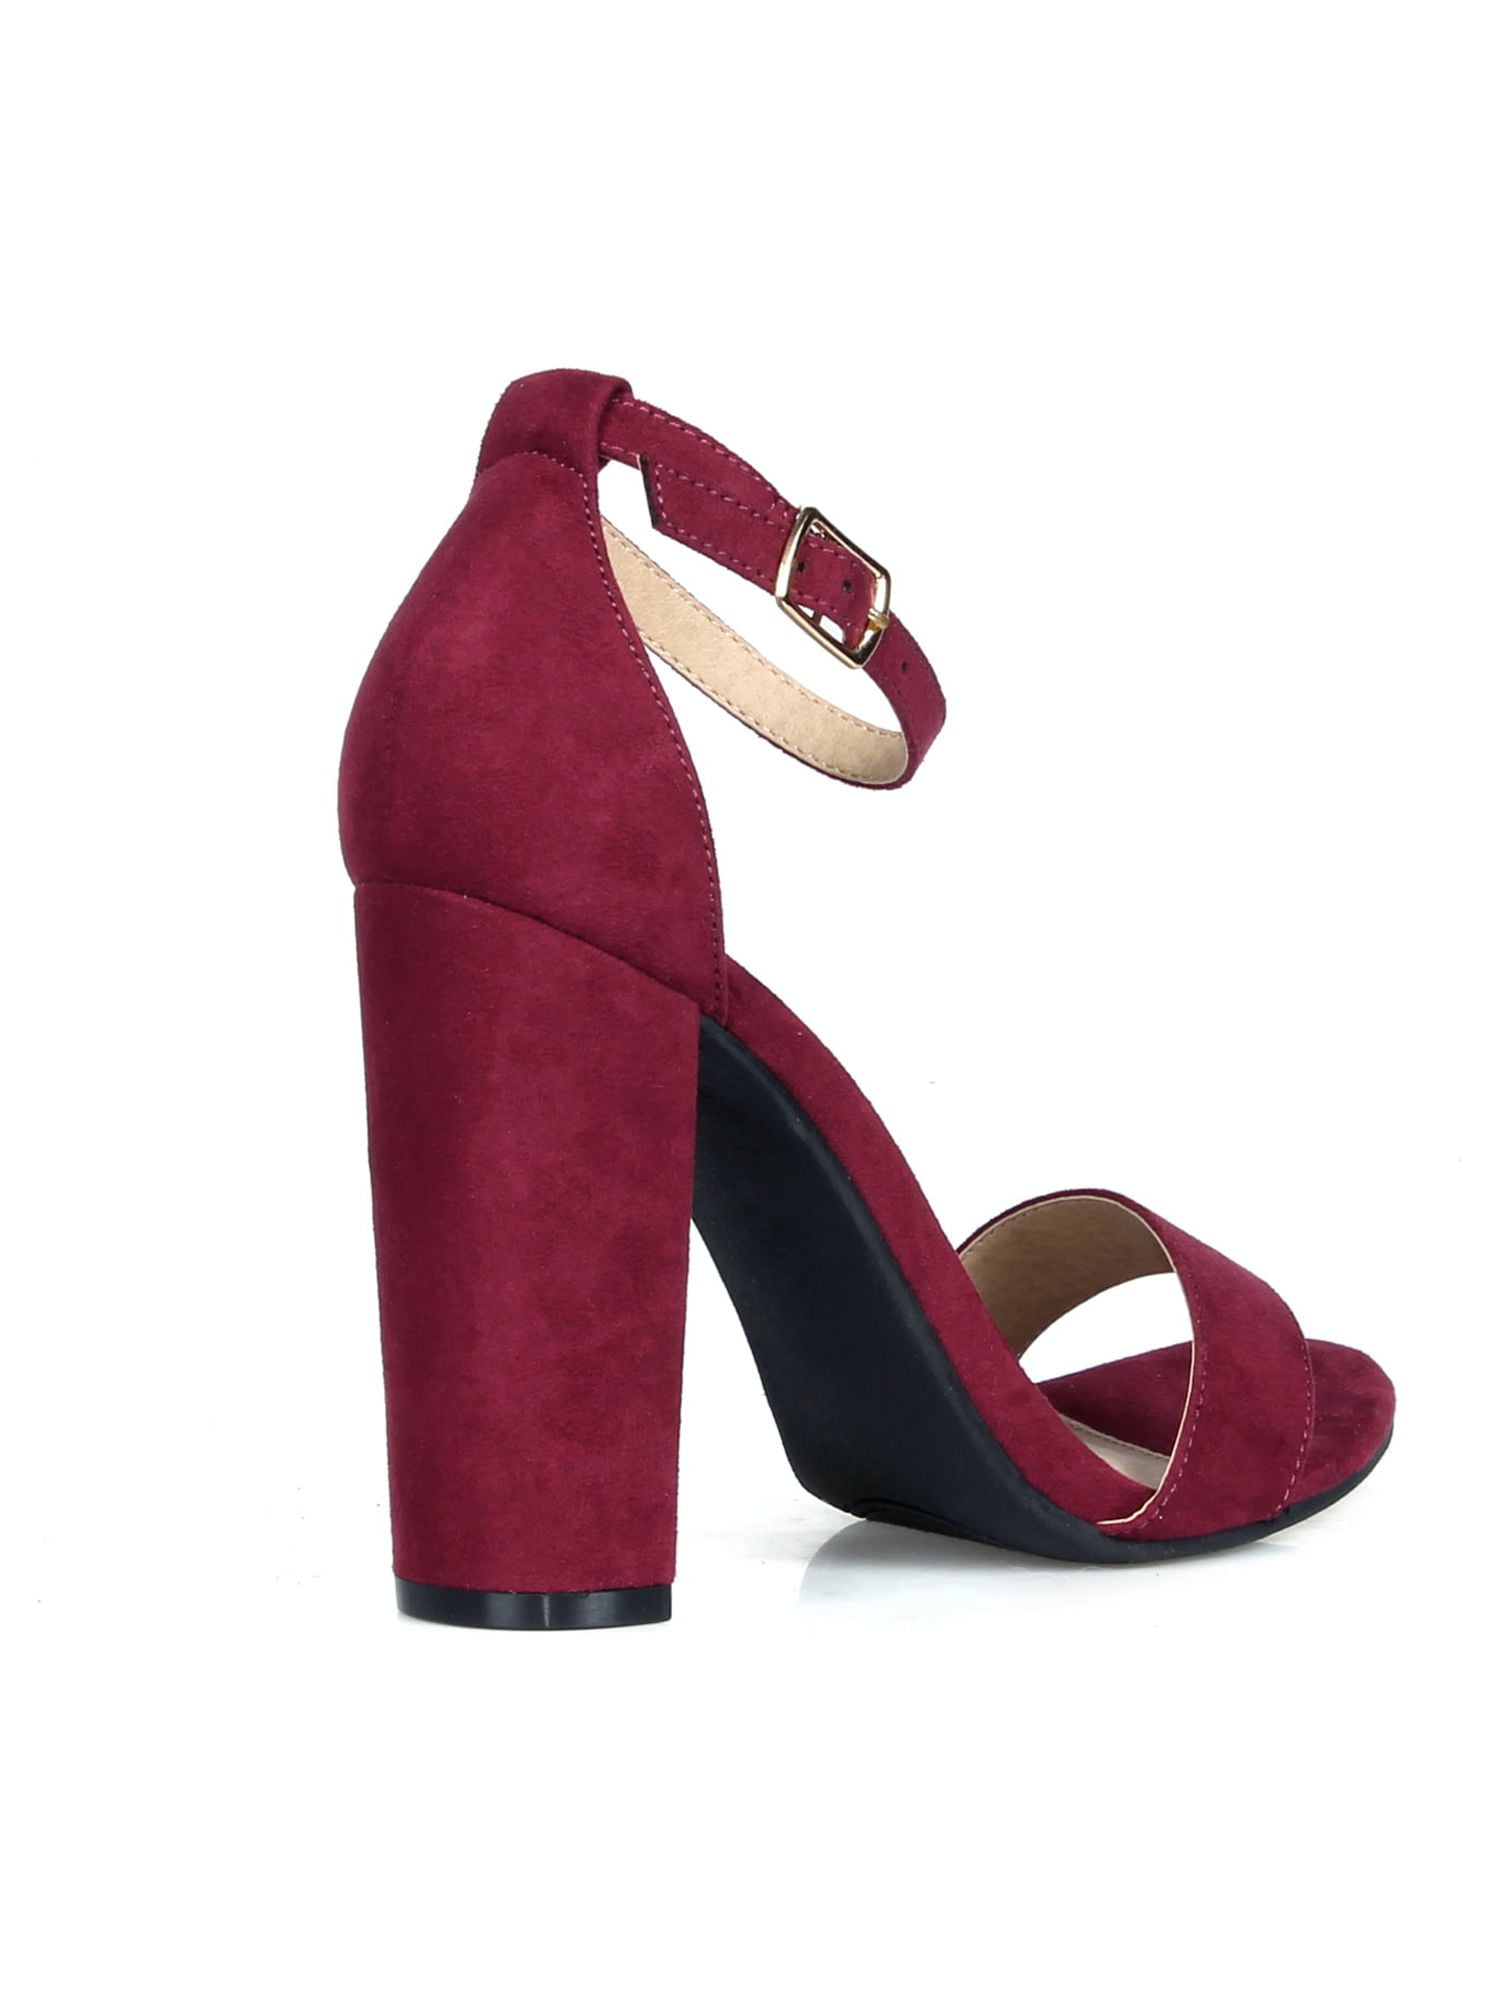 Coquette Aesthetic Cherry Red Heels Mary Jane Shoes – The Kawaii Factory